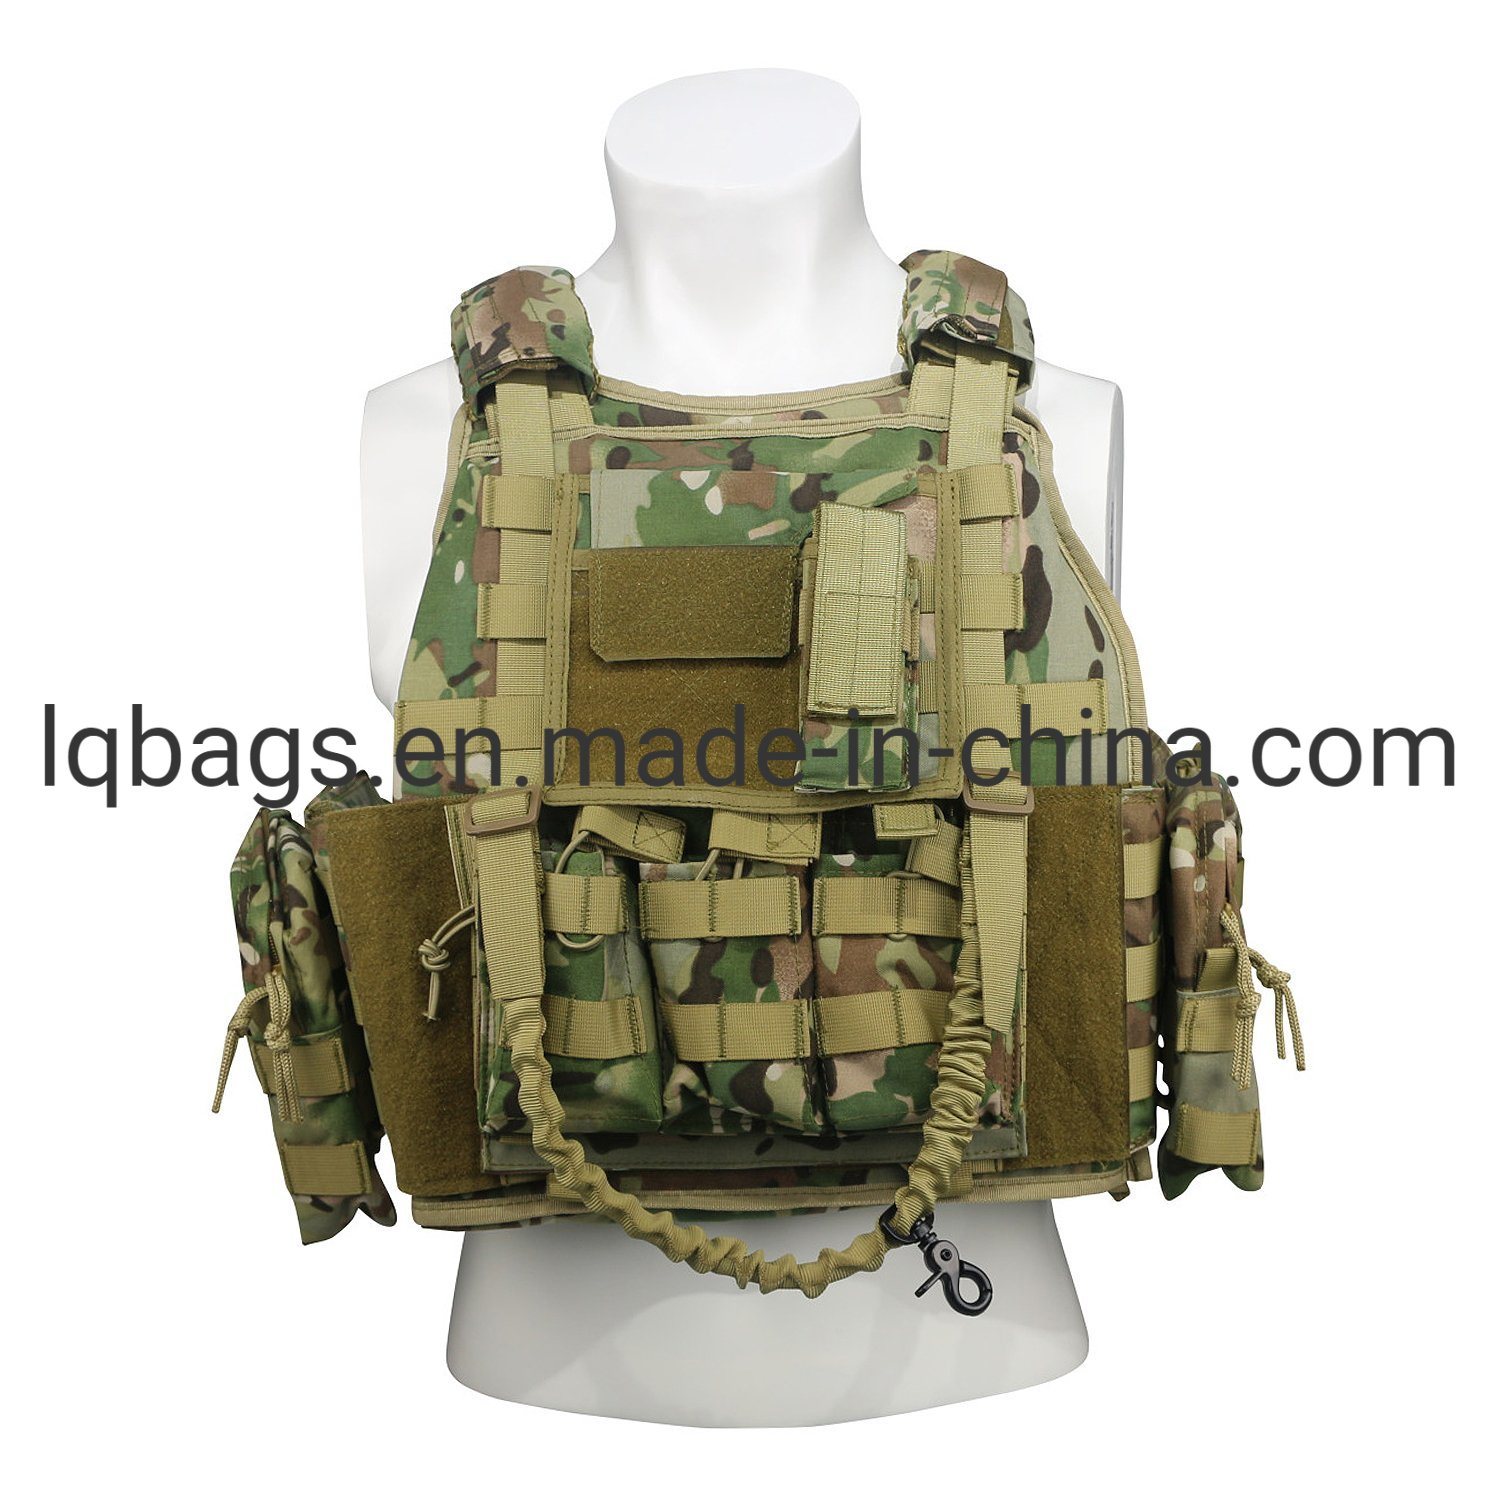 Plate Carrier Durable Multi-Function Army Military Combat Tactical Vest